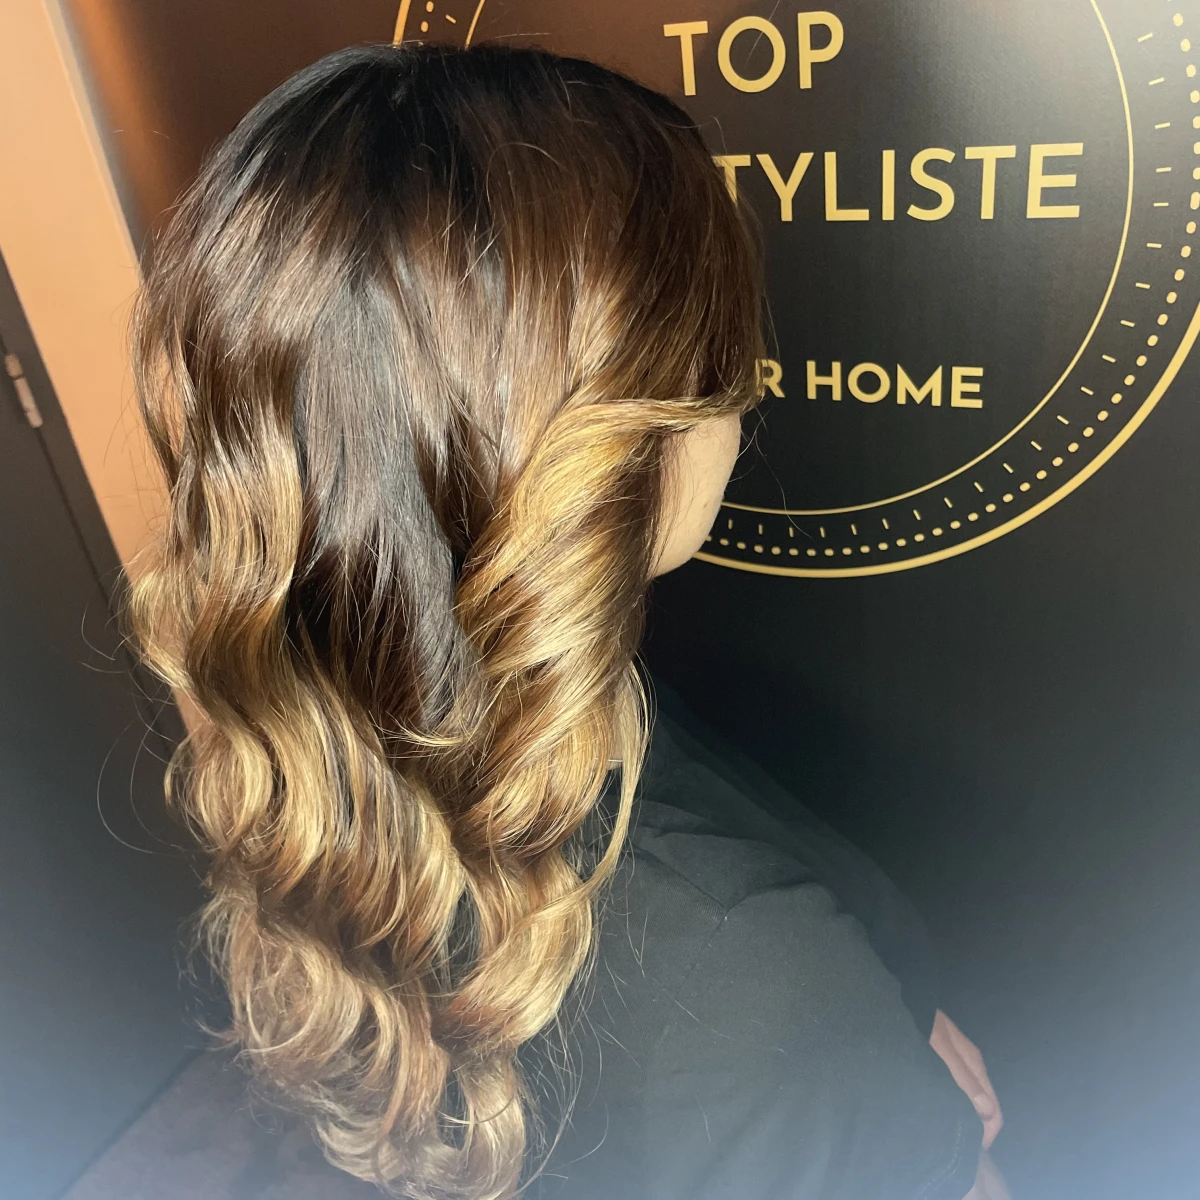 photo - Top hairstyliste at your home